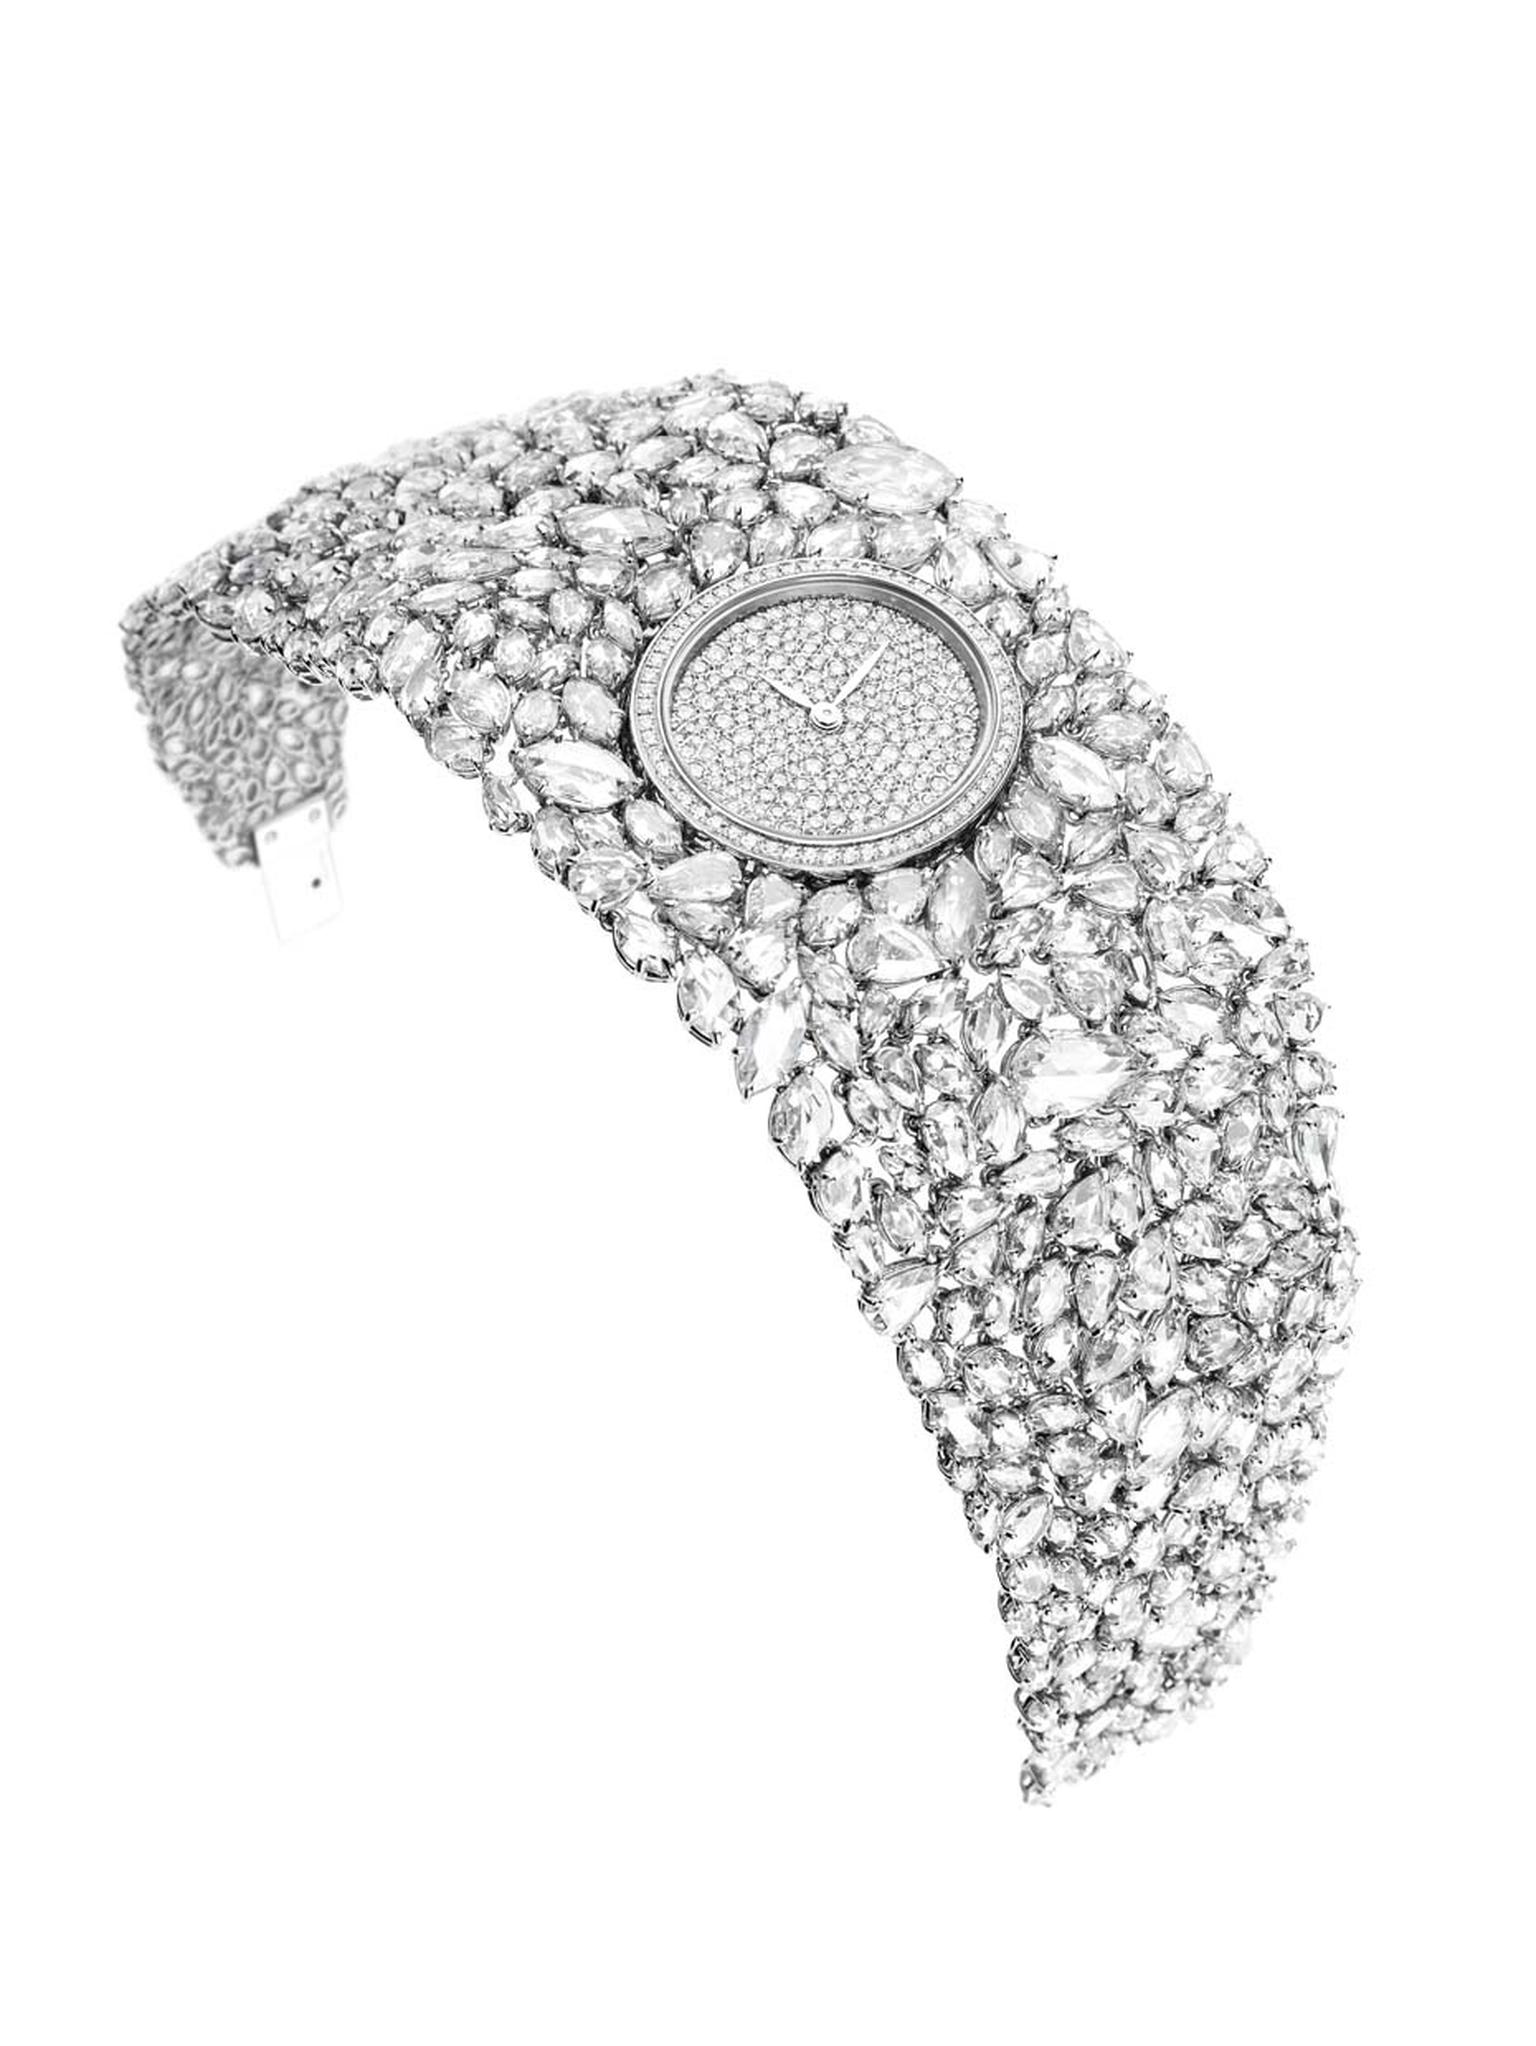 Placed in the middle of the diamond bracelet on DeLaneau's Grace Diamonds jewellery watch is an oval dial set with 268 diamonds, bringing the total carat weight to 44.